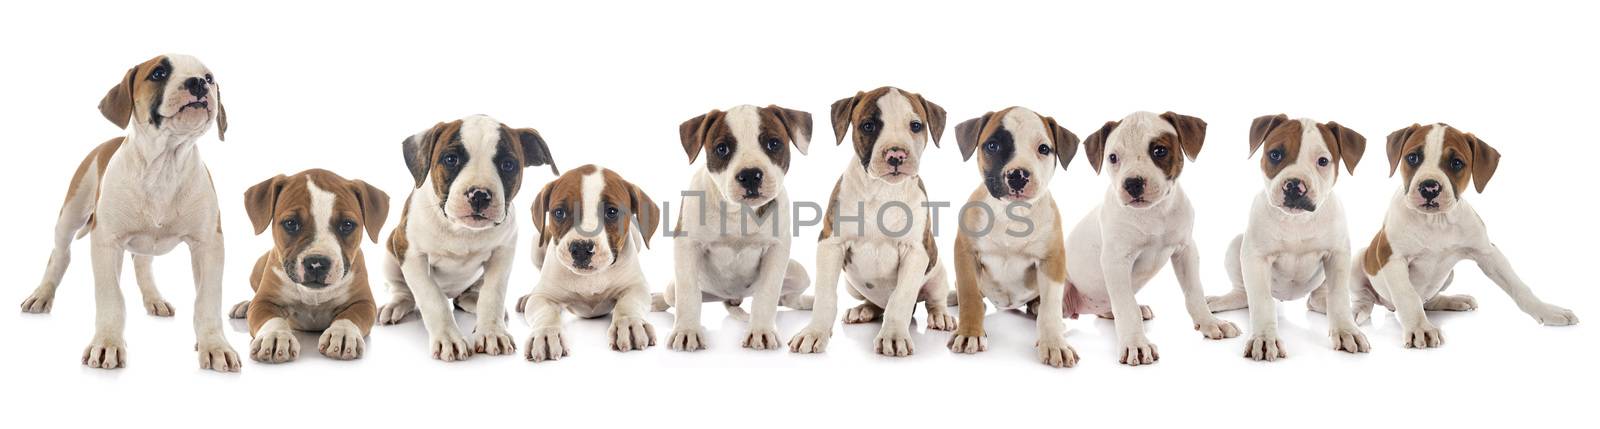 puppies american bulldog in front of white background